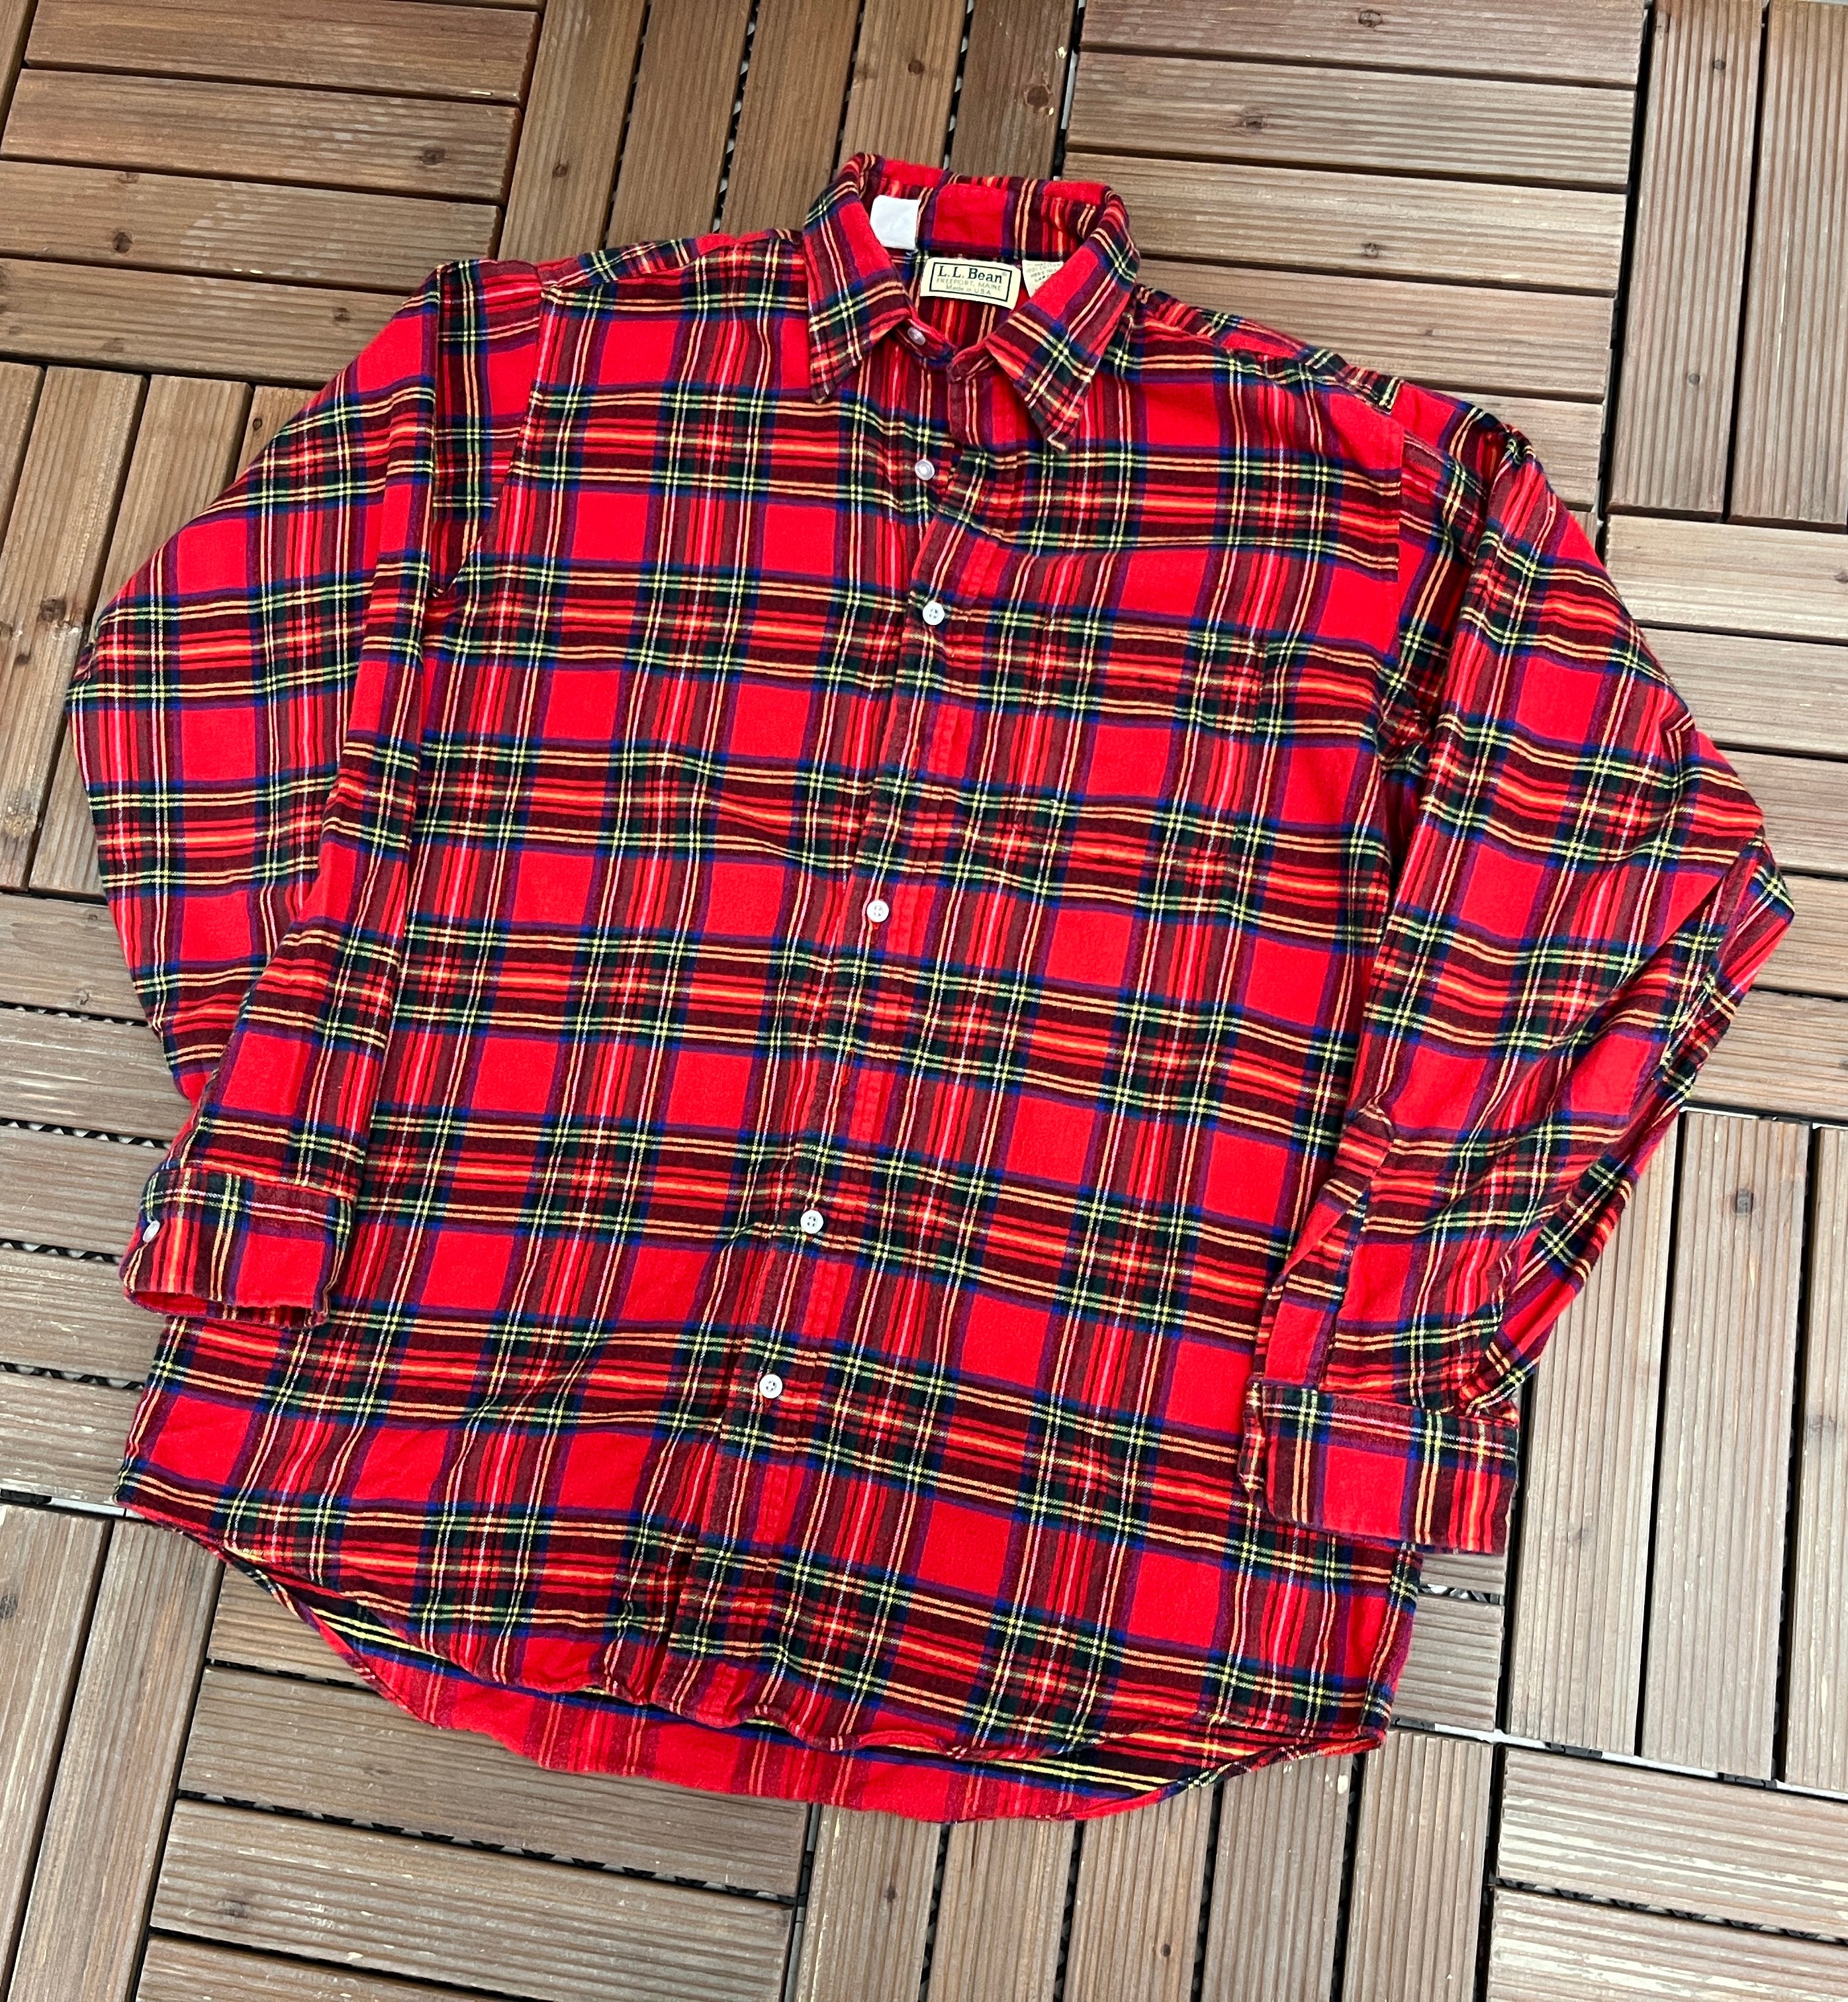 L.L. Bean Red Plaid Flannel Shirt | Size Large | Vintage 1990s Red